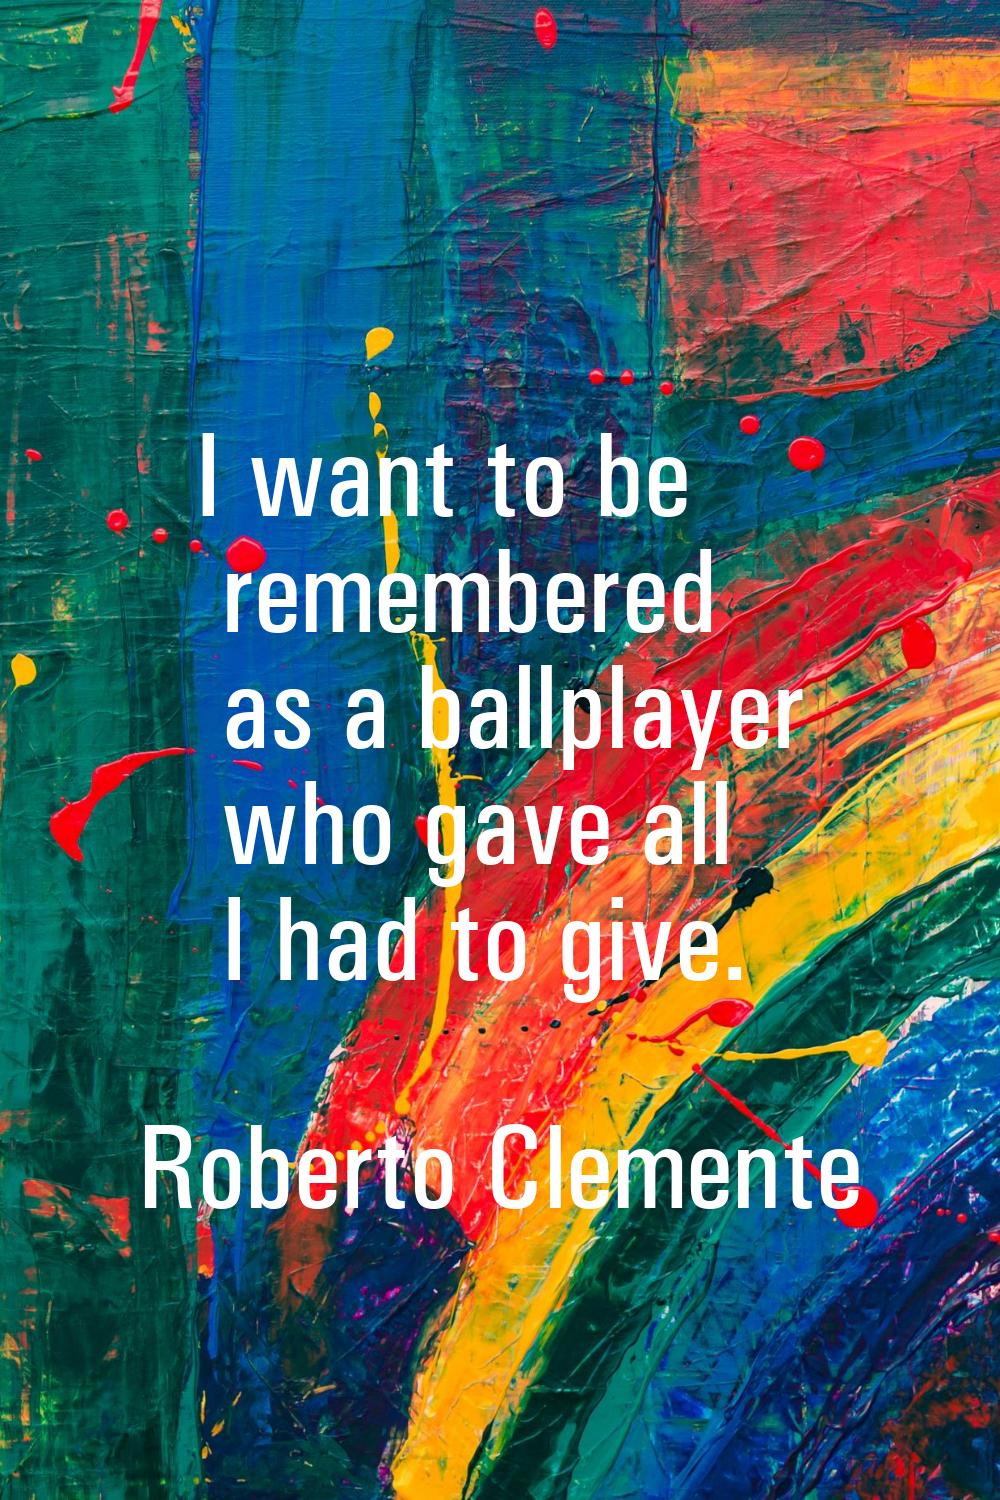 I want to be remembered as a ballplayer who gave all I had to give.